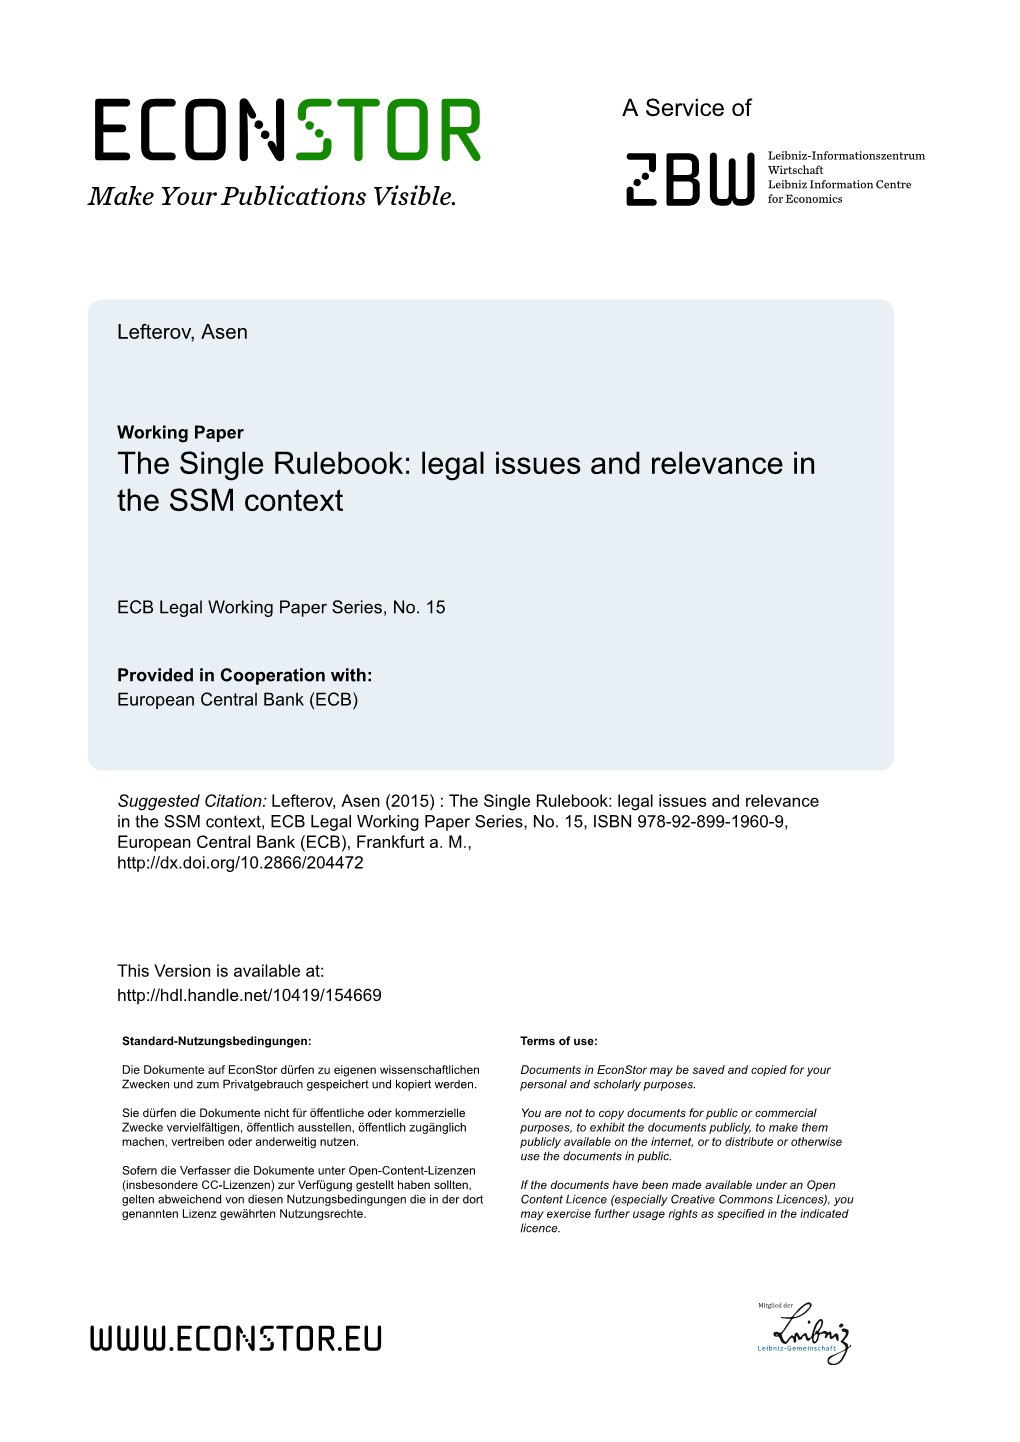 The Single Rulebook: Legal Issues and Relevance in the SSM Context